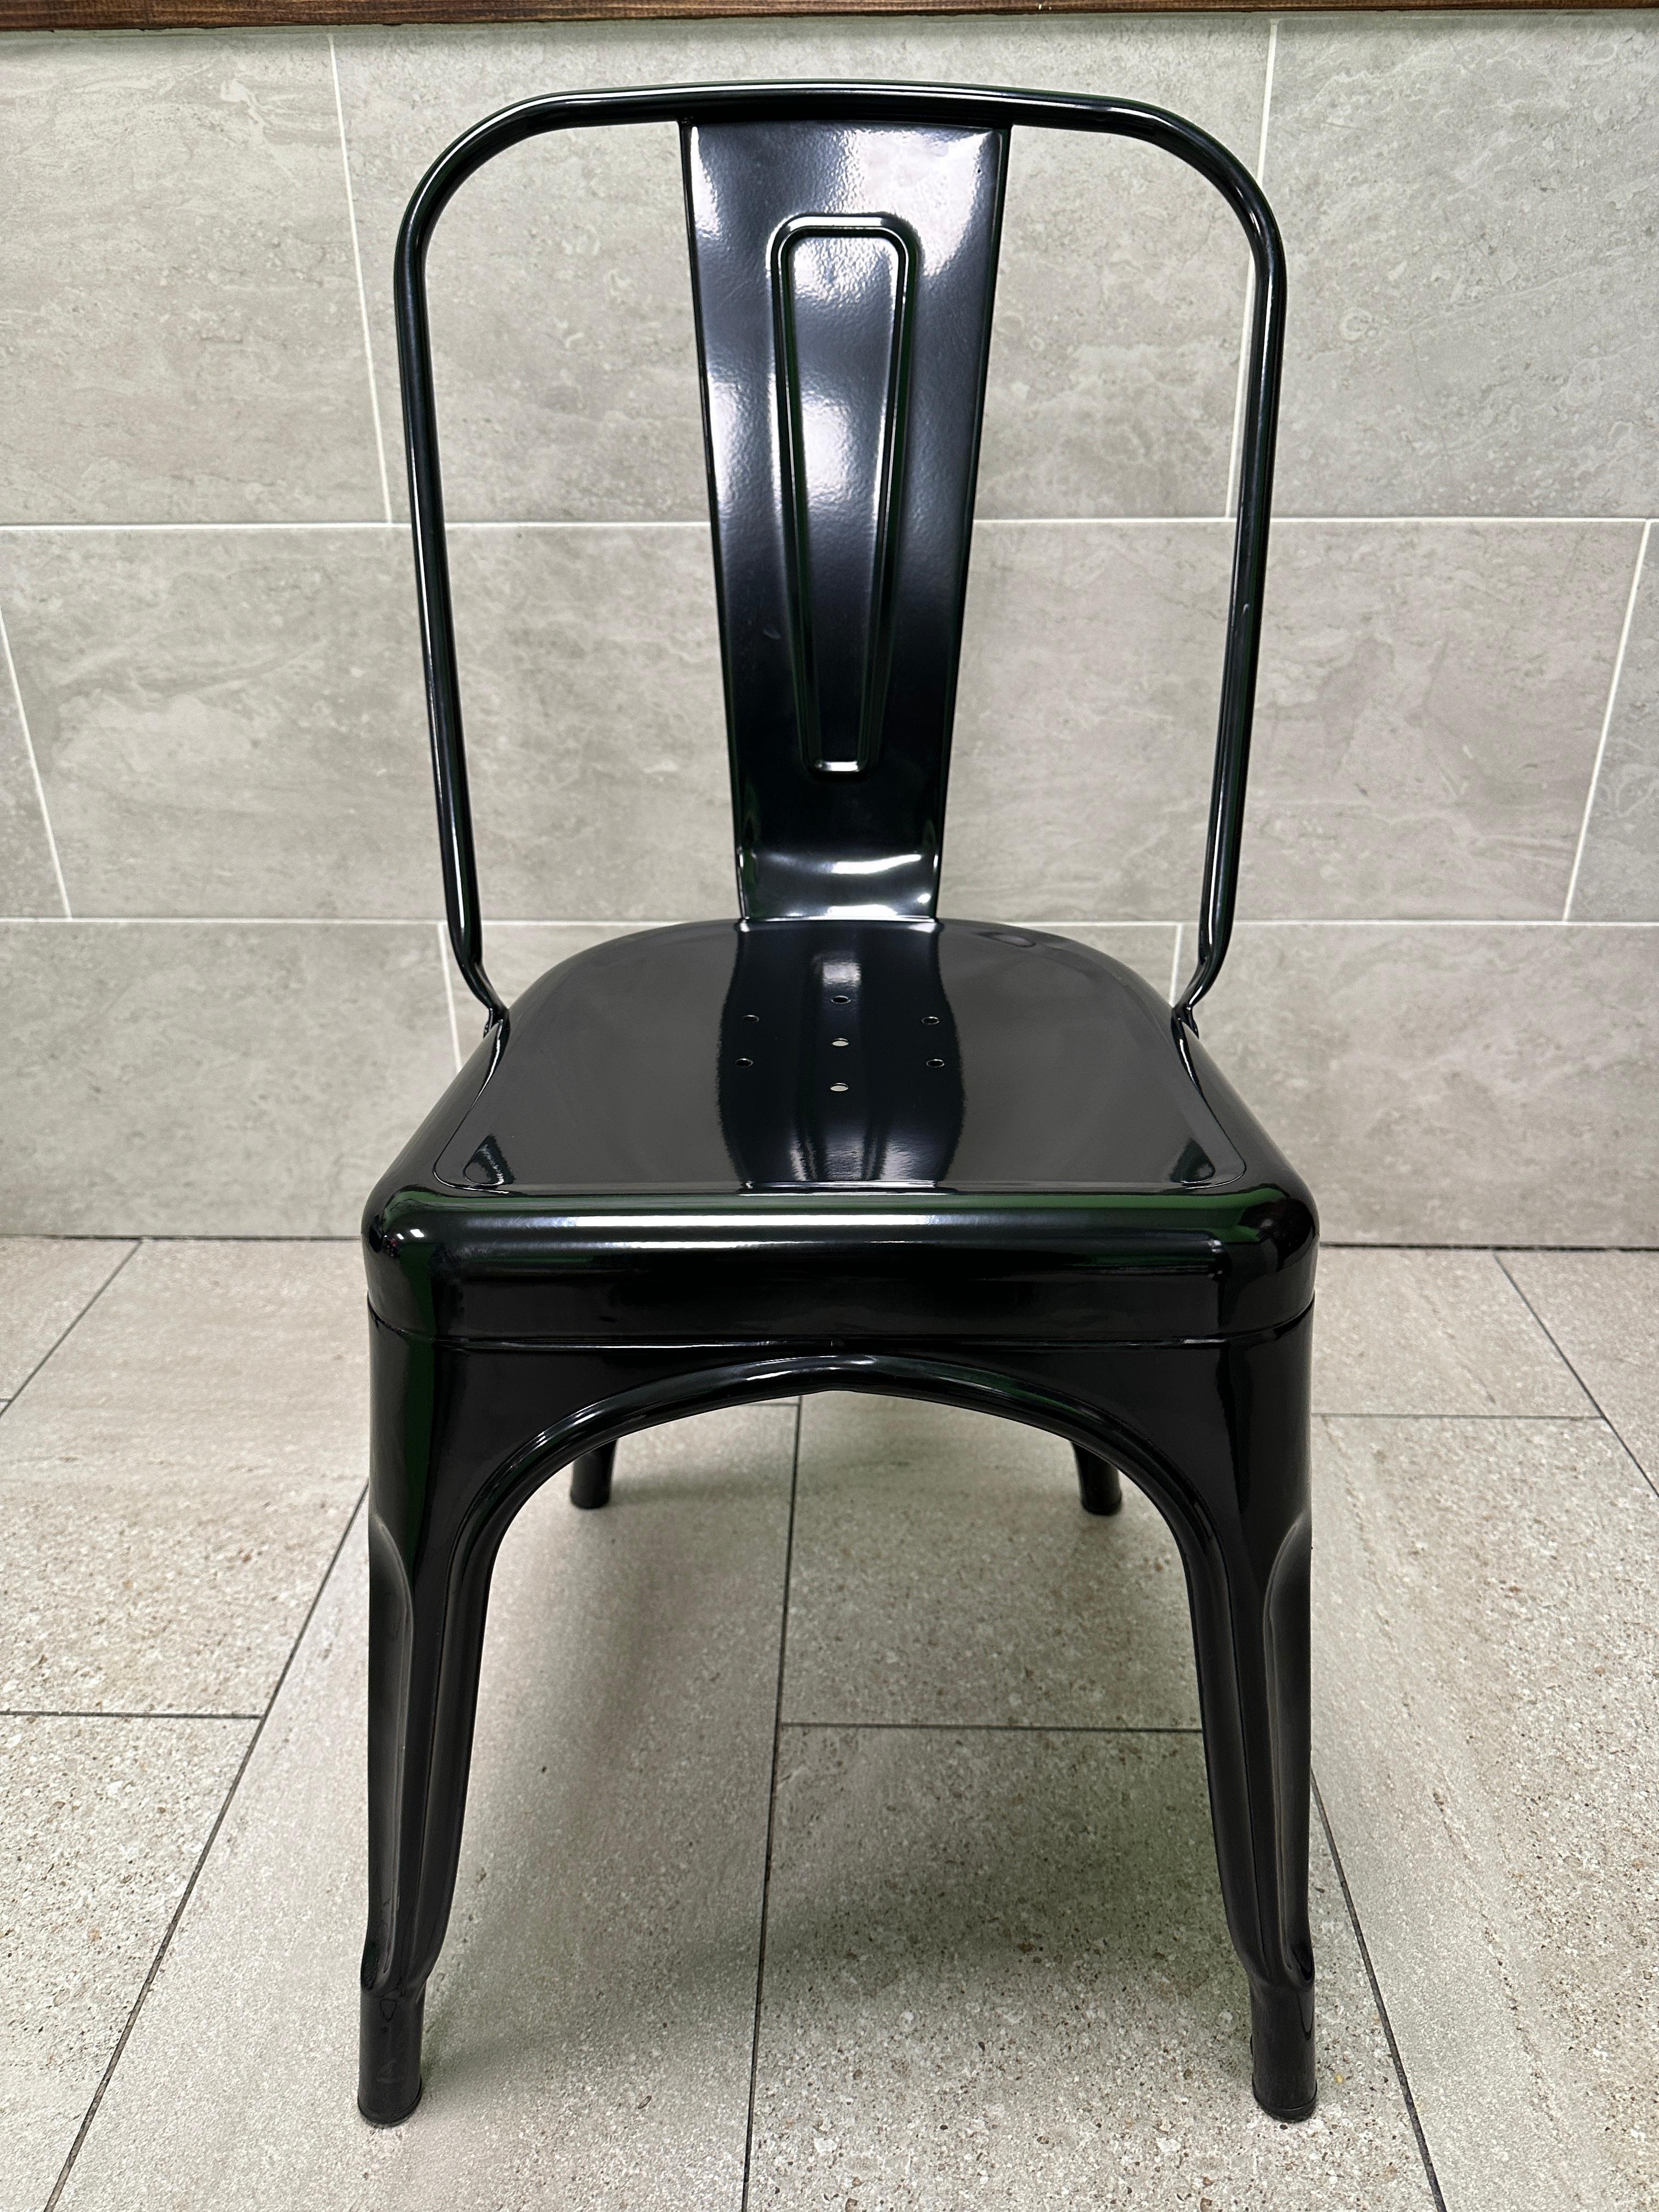 amazing metal chair, very nice finish black color. match with any wall color!